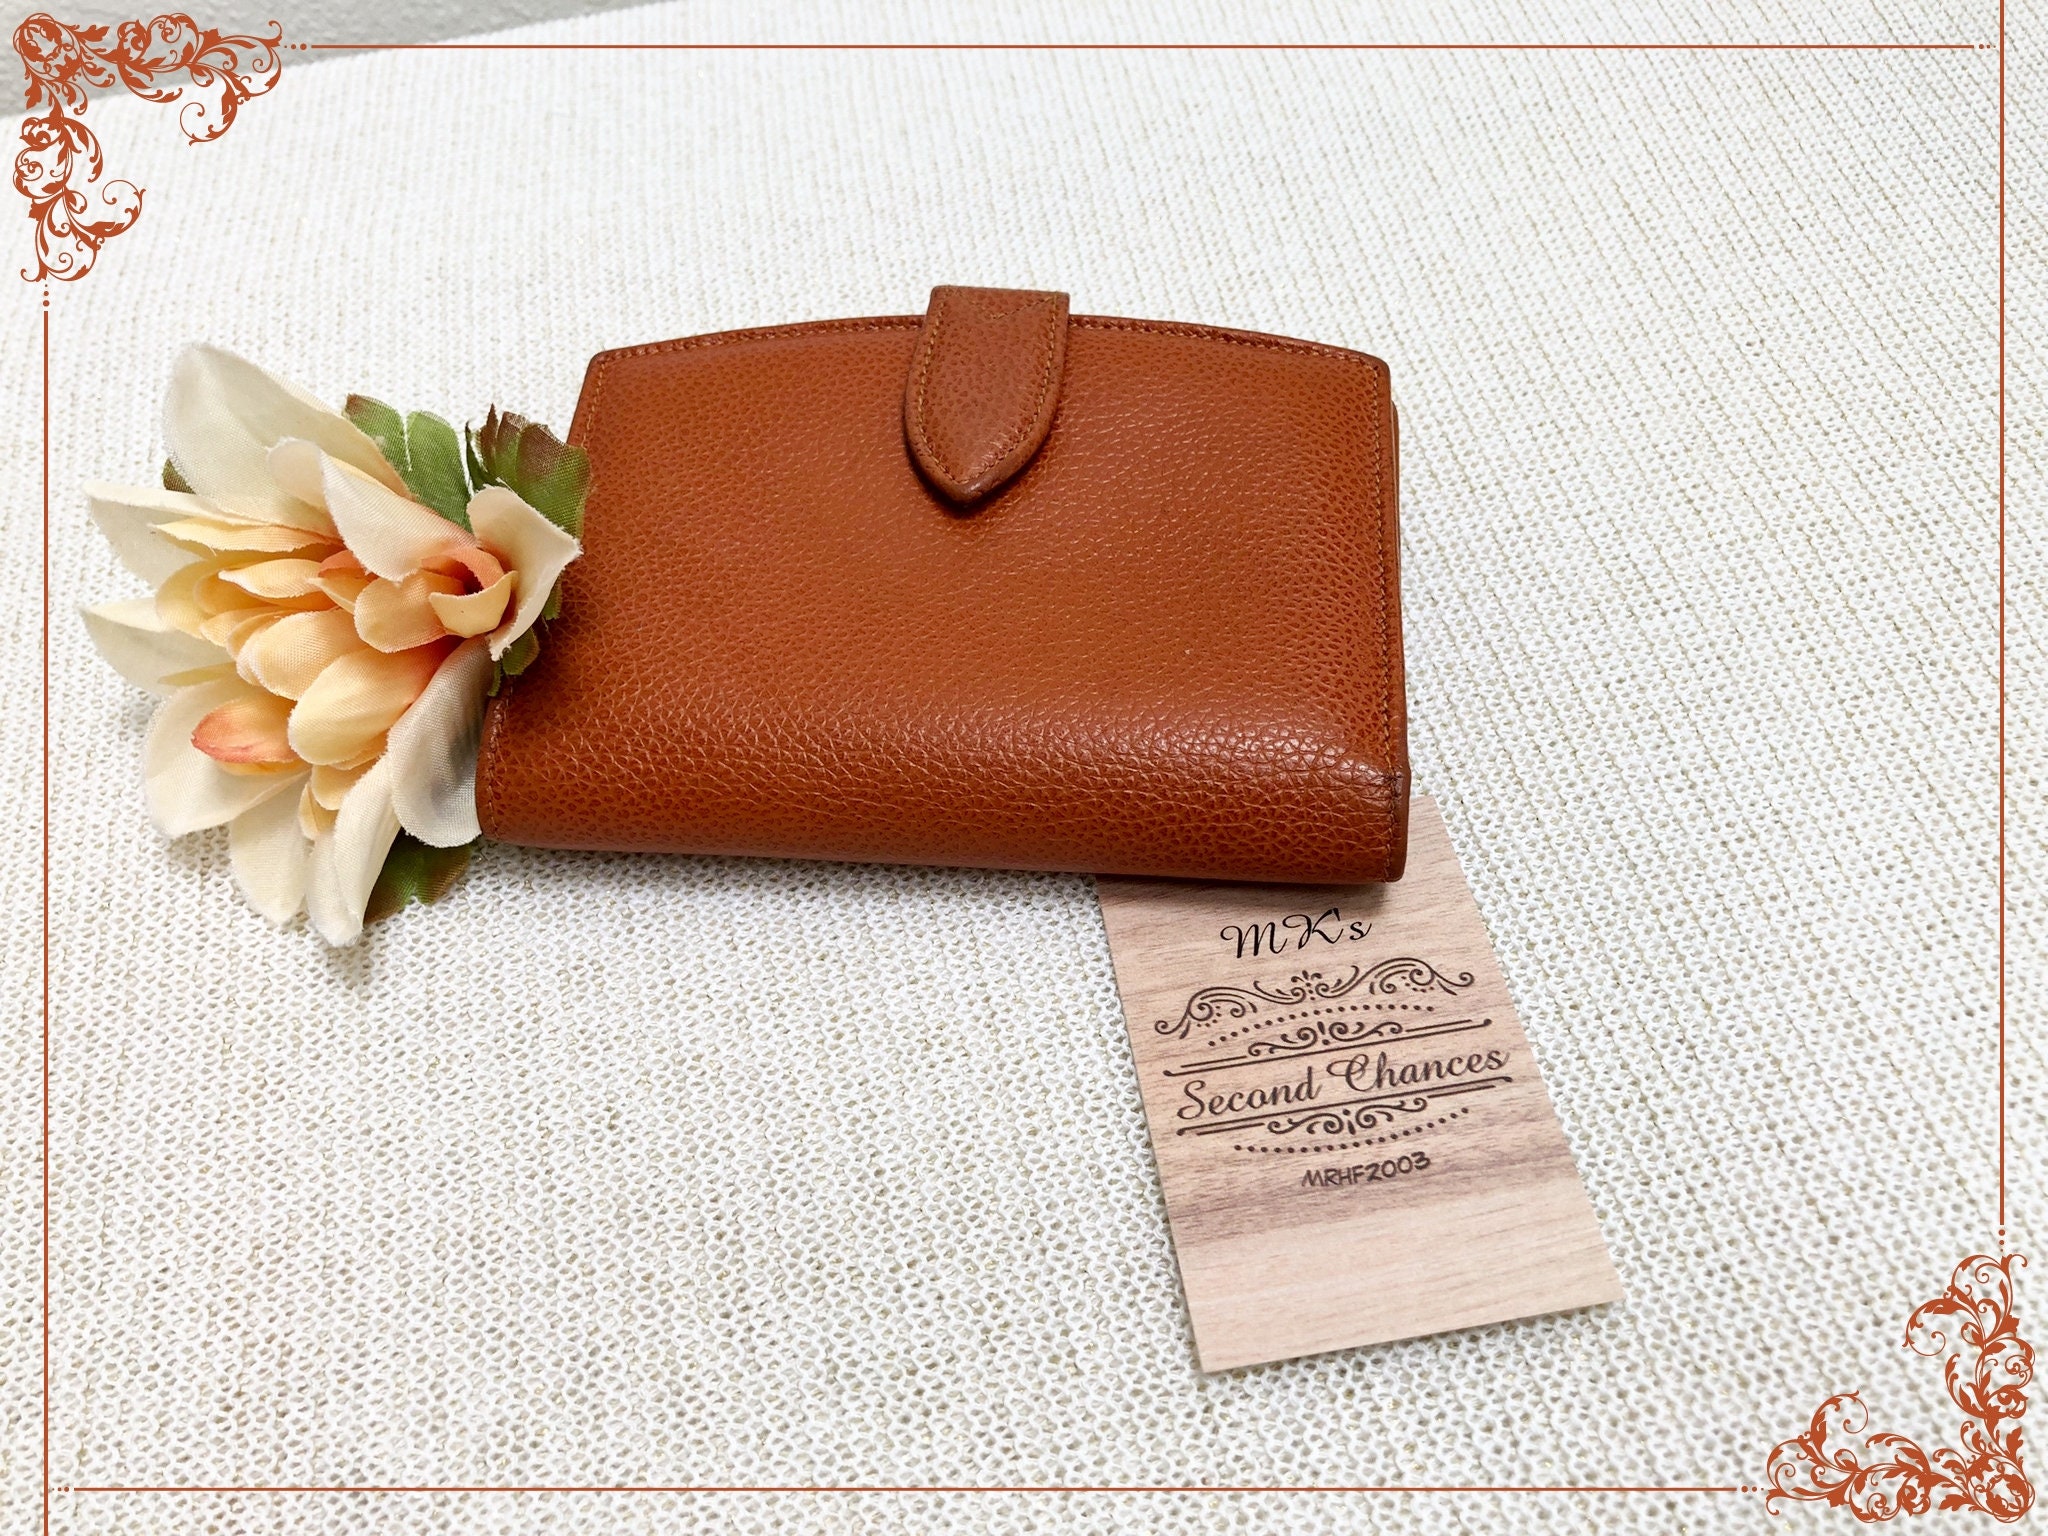 Original Vintage Coach Pochette Bag, Luxury, Bags & Wallets on Carousell